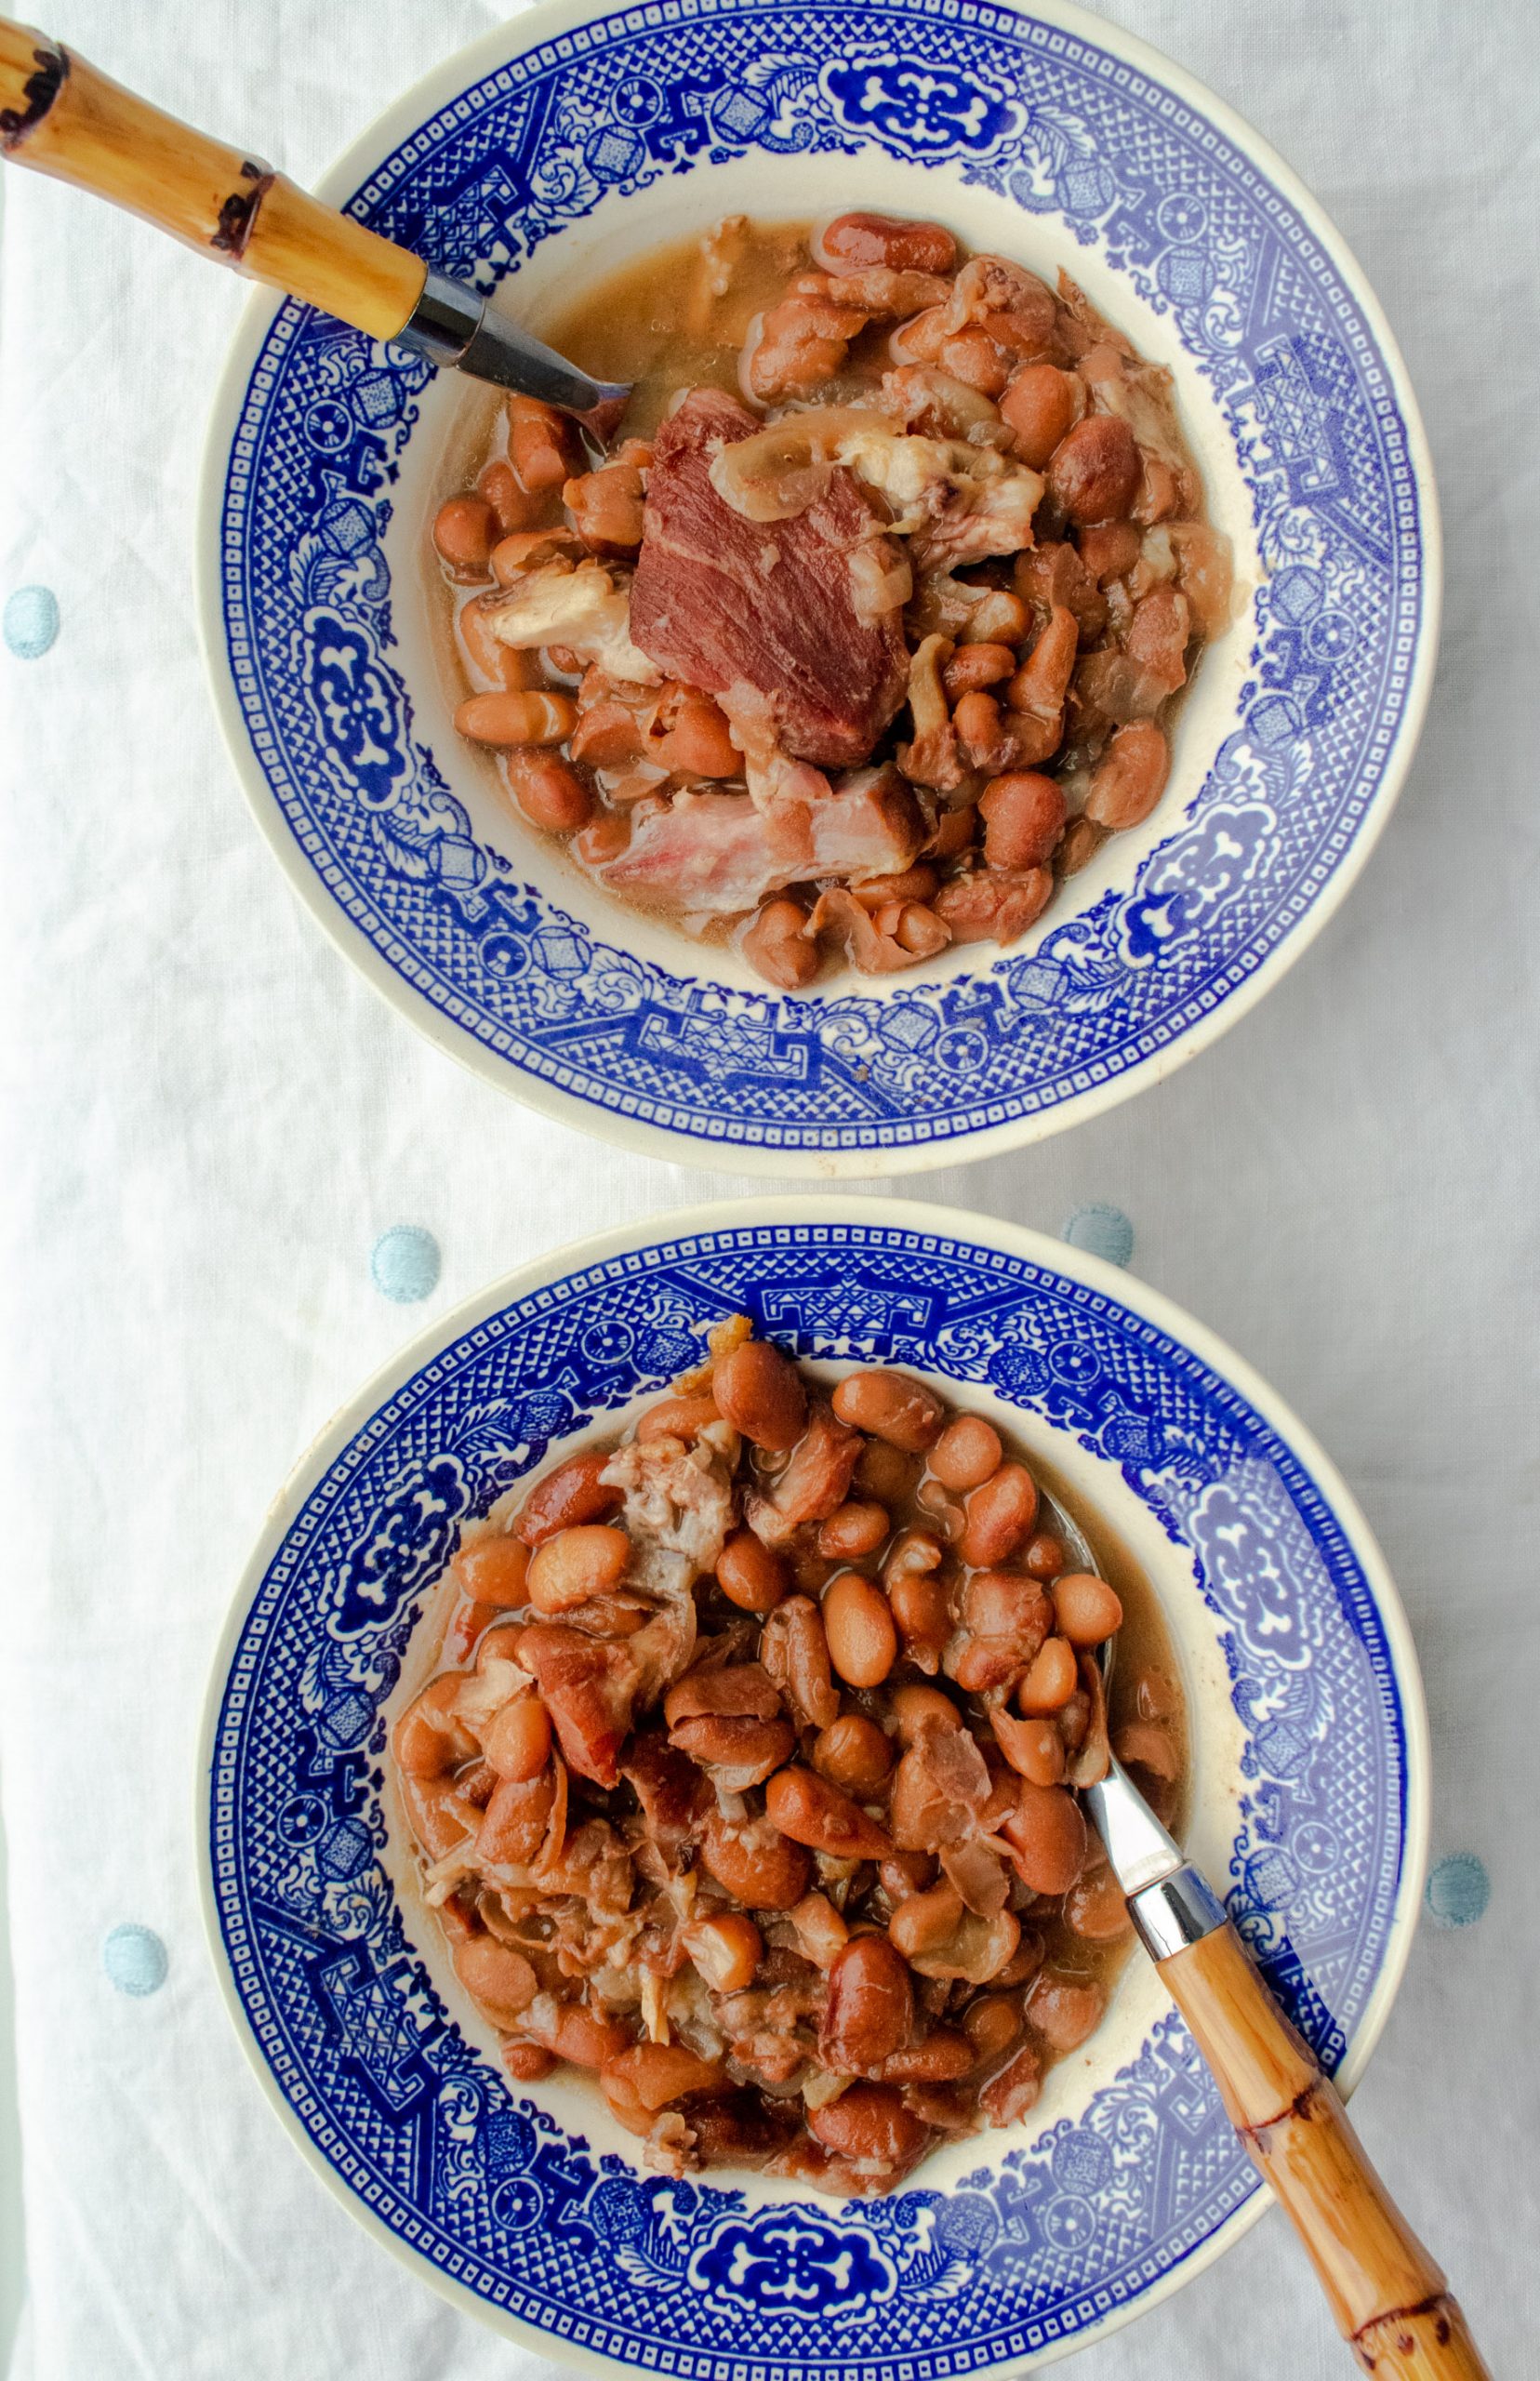 Soup beans, or southern pinto beans, are the perfect way to use up a leftover hamhock. This blog post will walk you through making the best ham and bean soup using your Instant Pot. If you've never cooked dry beans before, fear not, this post is just for you!